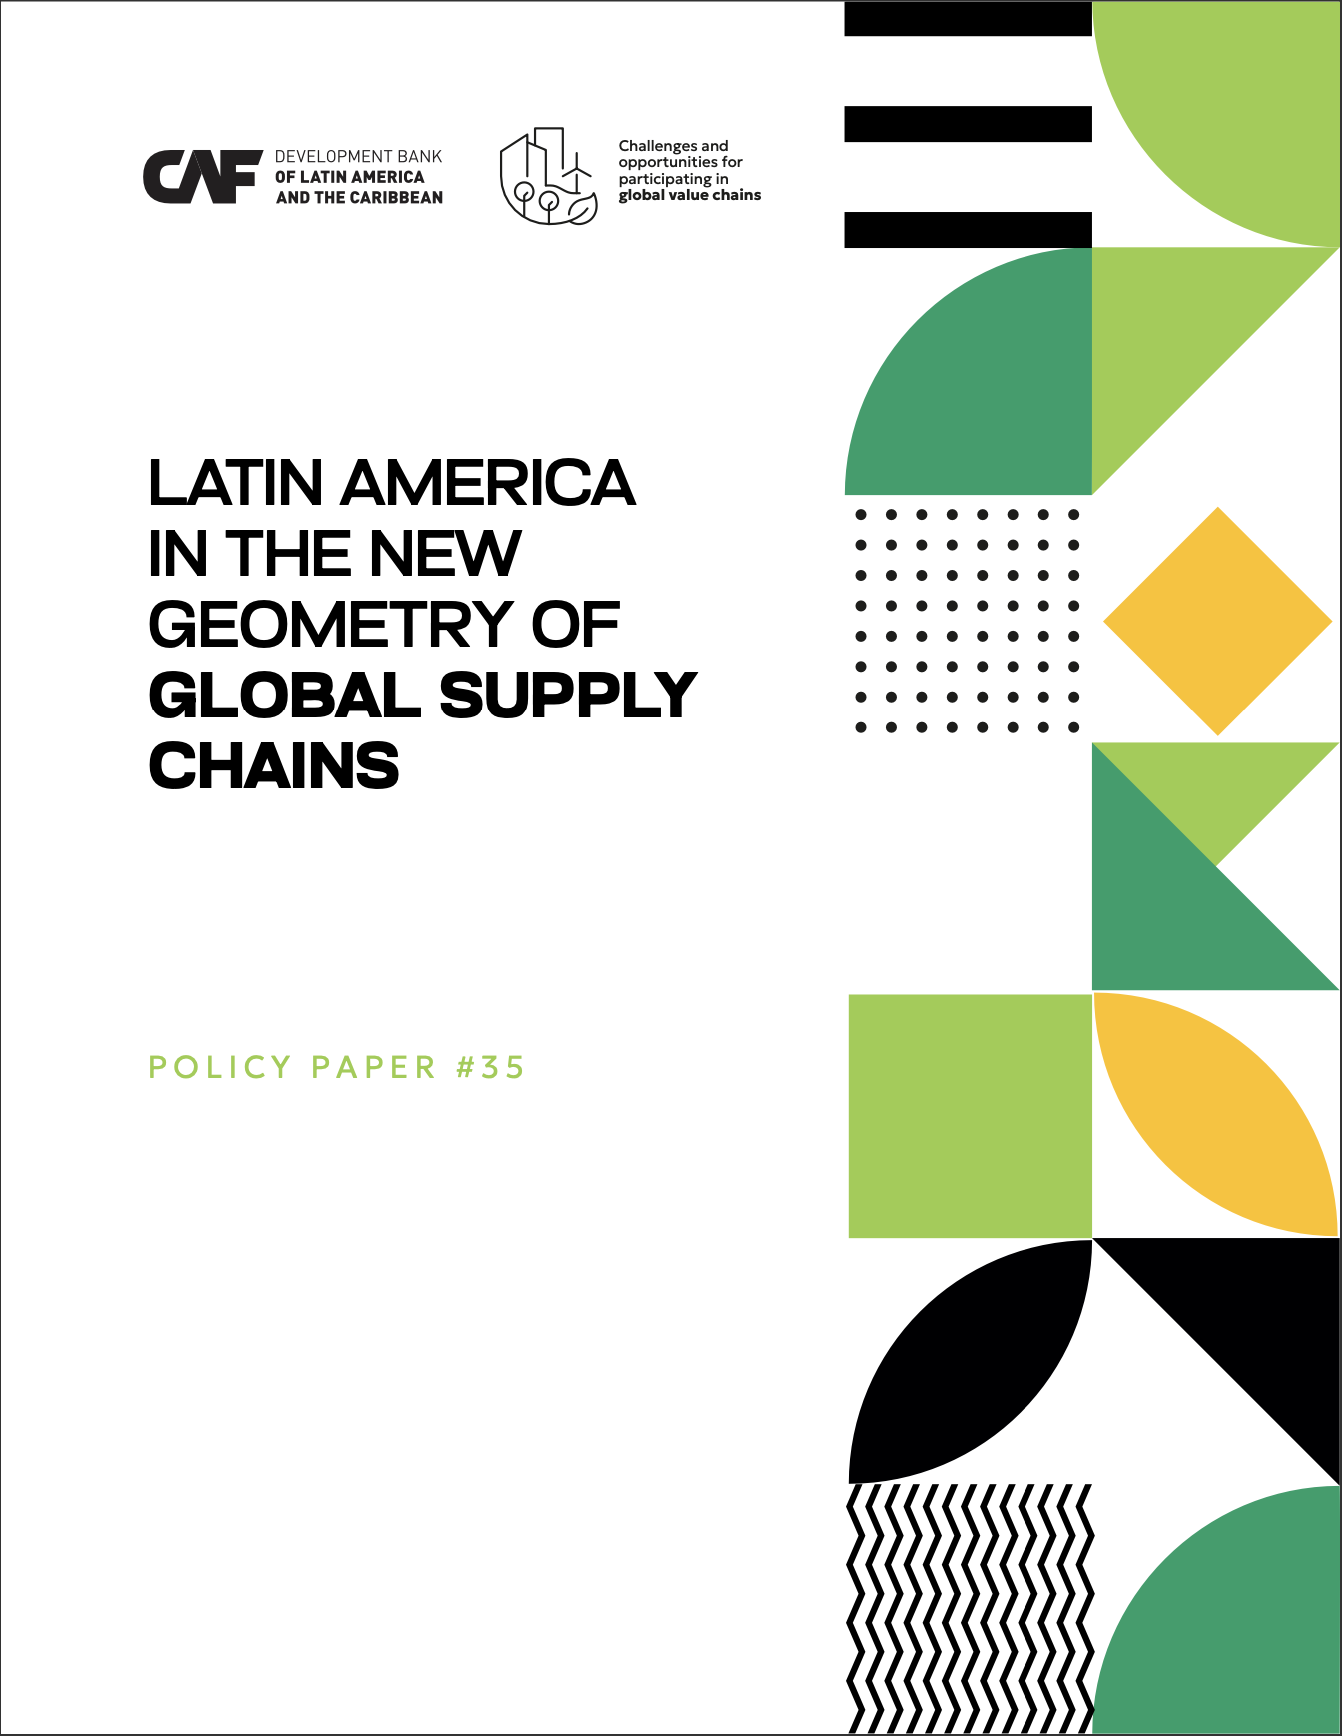 Latin America in the new geometry of global supply chains